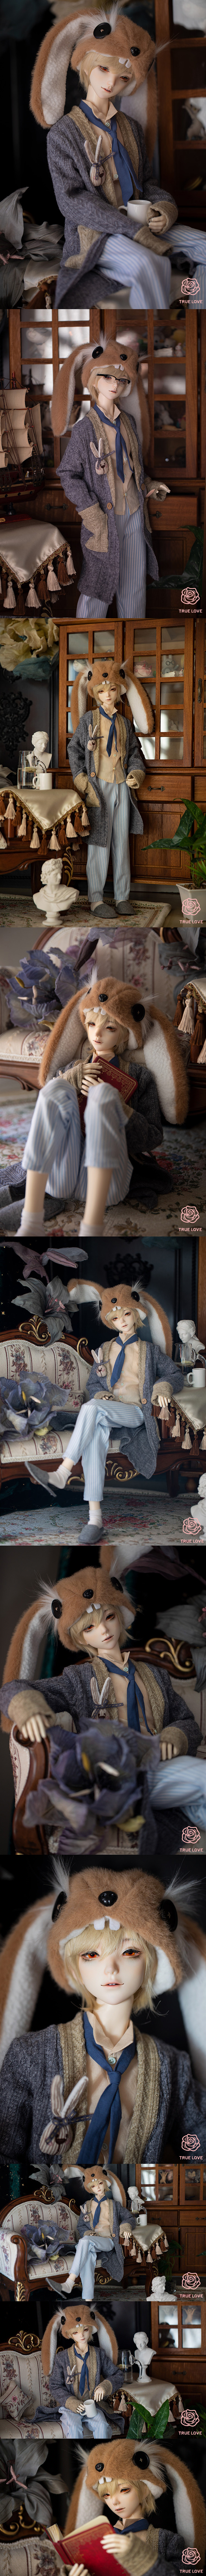 BJD March Hare Ball Jointed Doll